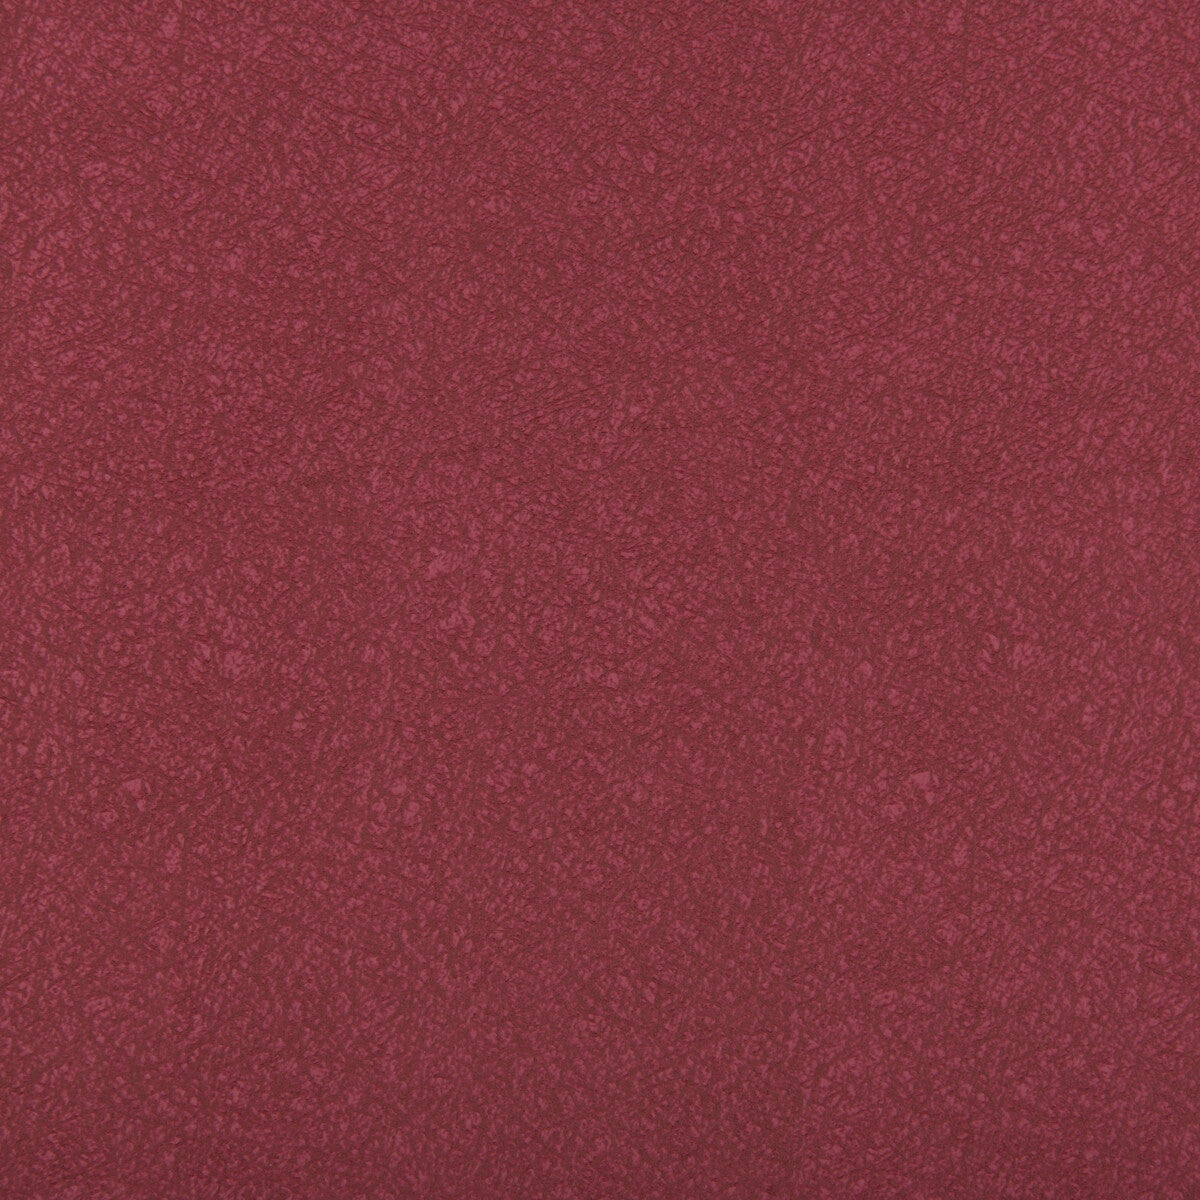 Ames fabric in raspberry color - pattern AMES.97.0 - by Kravet Contract